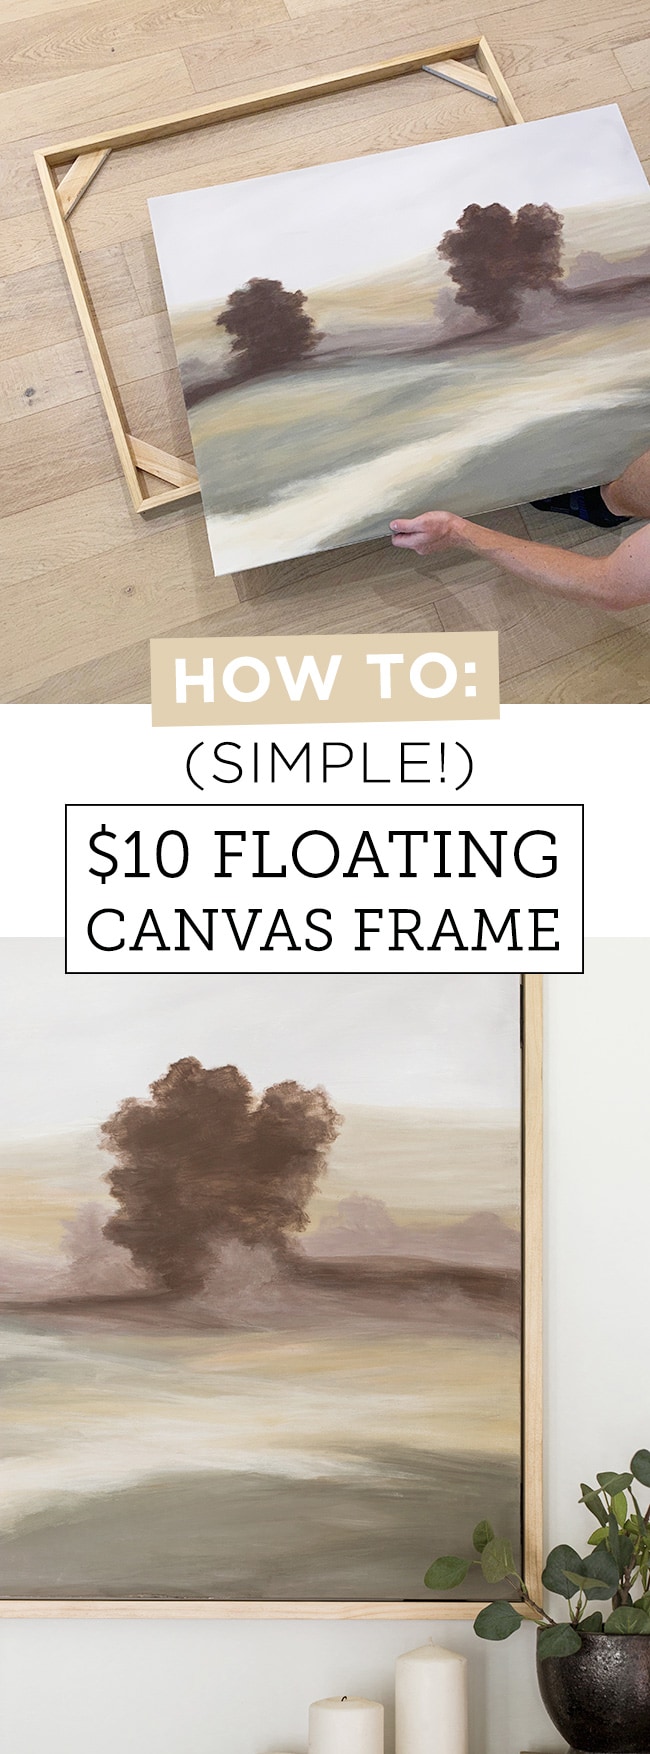 How to Make a Reverse Canvas: Easy & Inexpensive Framed Art!